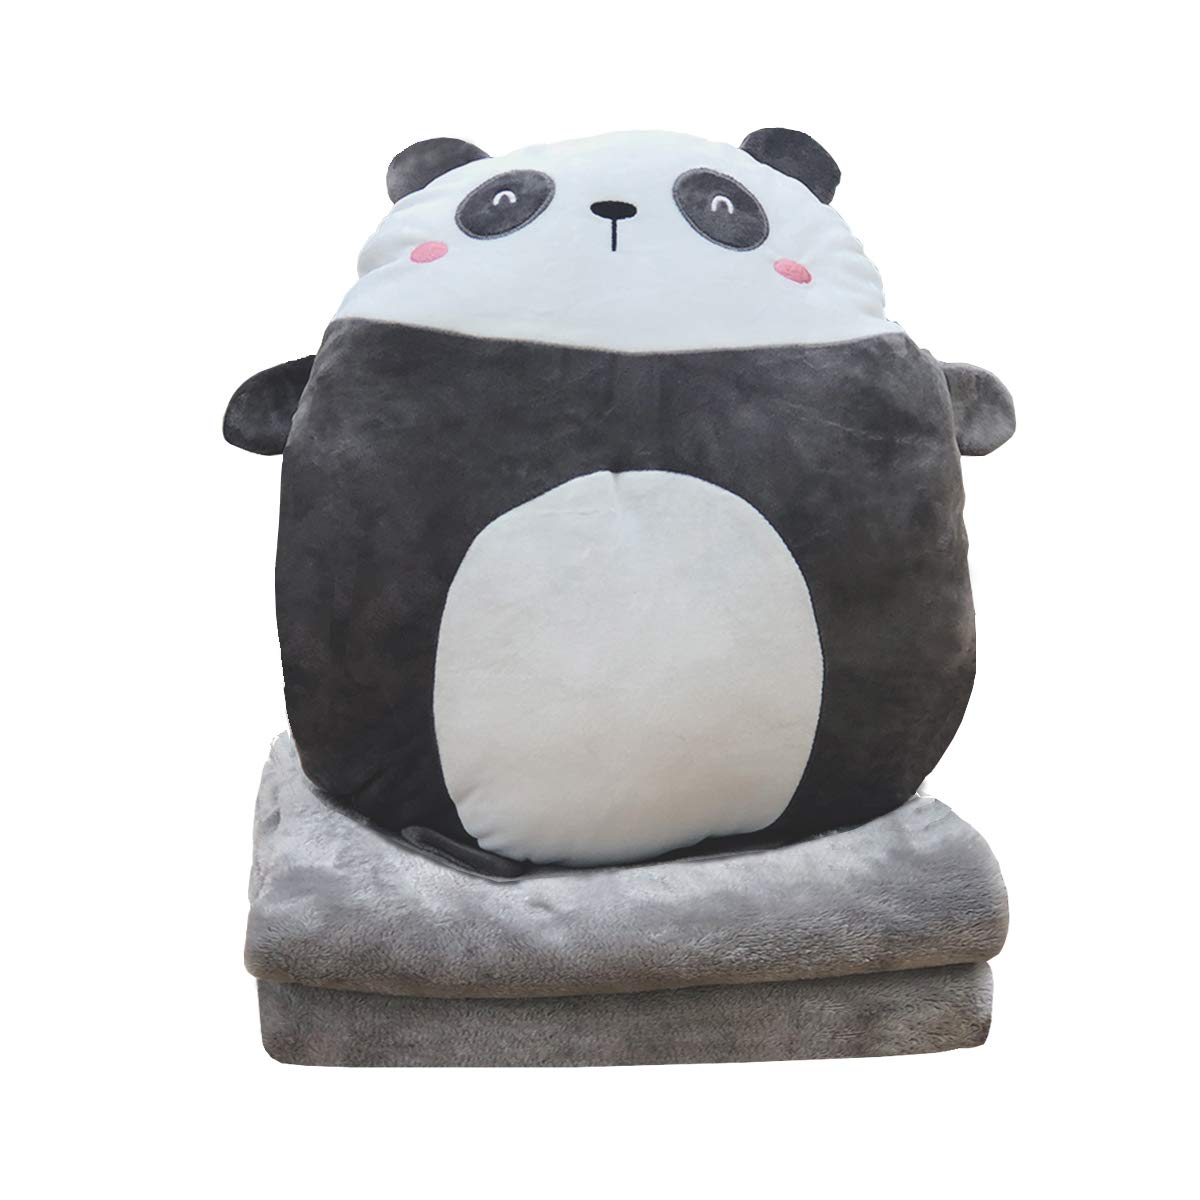 DXDE4U Soft Panda Plush Hugging Pillow 16 Inch, Cute Anime Throw Pillow Stuffed Animal Doll Toy with Coral Fleece Blanket, Girls Boys Gifts for Birthday, Valentine, Christmas, Travel, Holiday